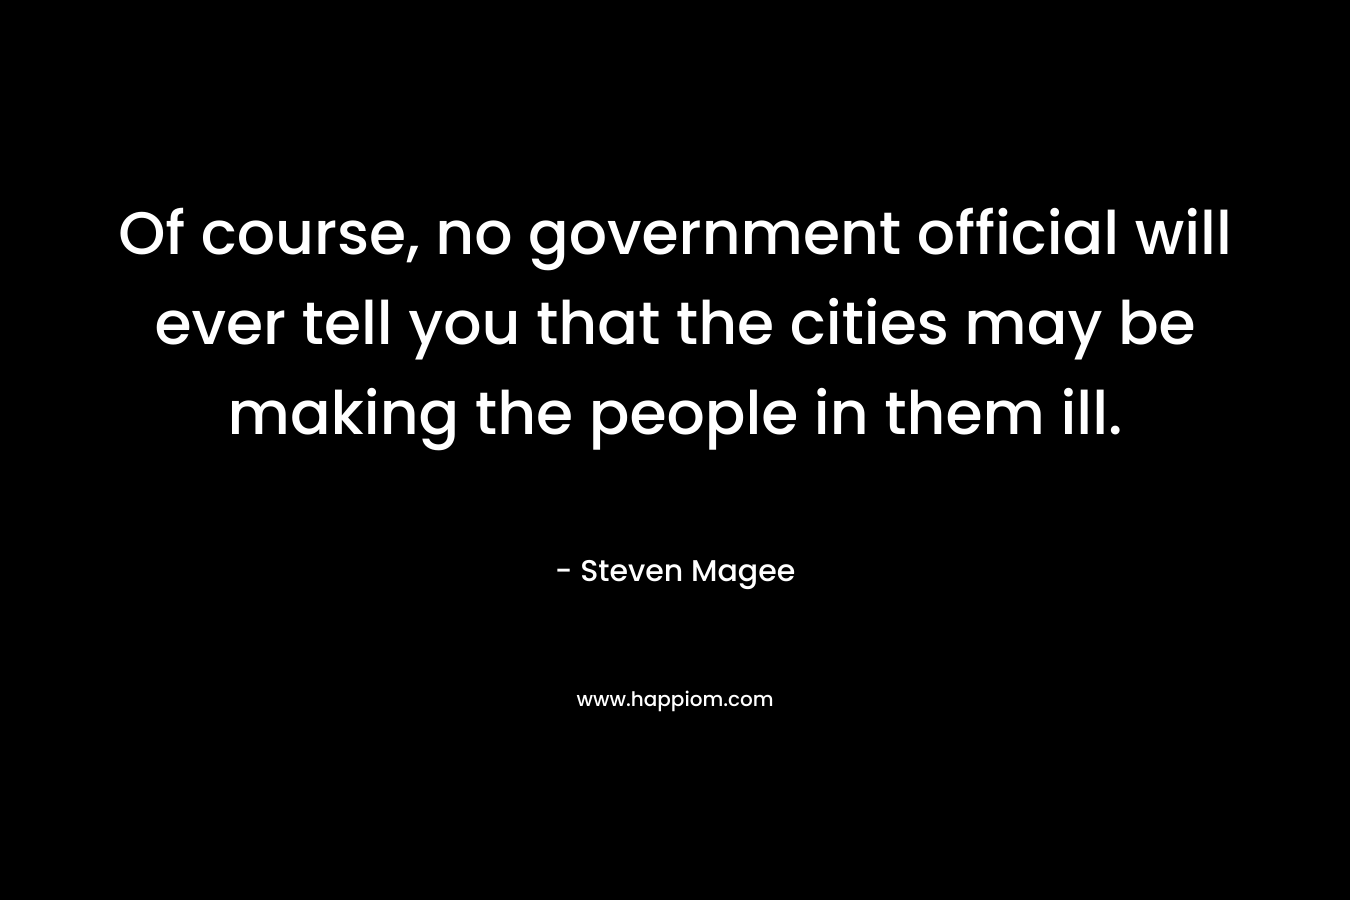 Of course, no government official will ever tell you that the cities may be making the people in them ill.